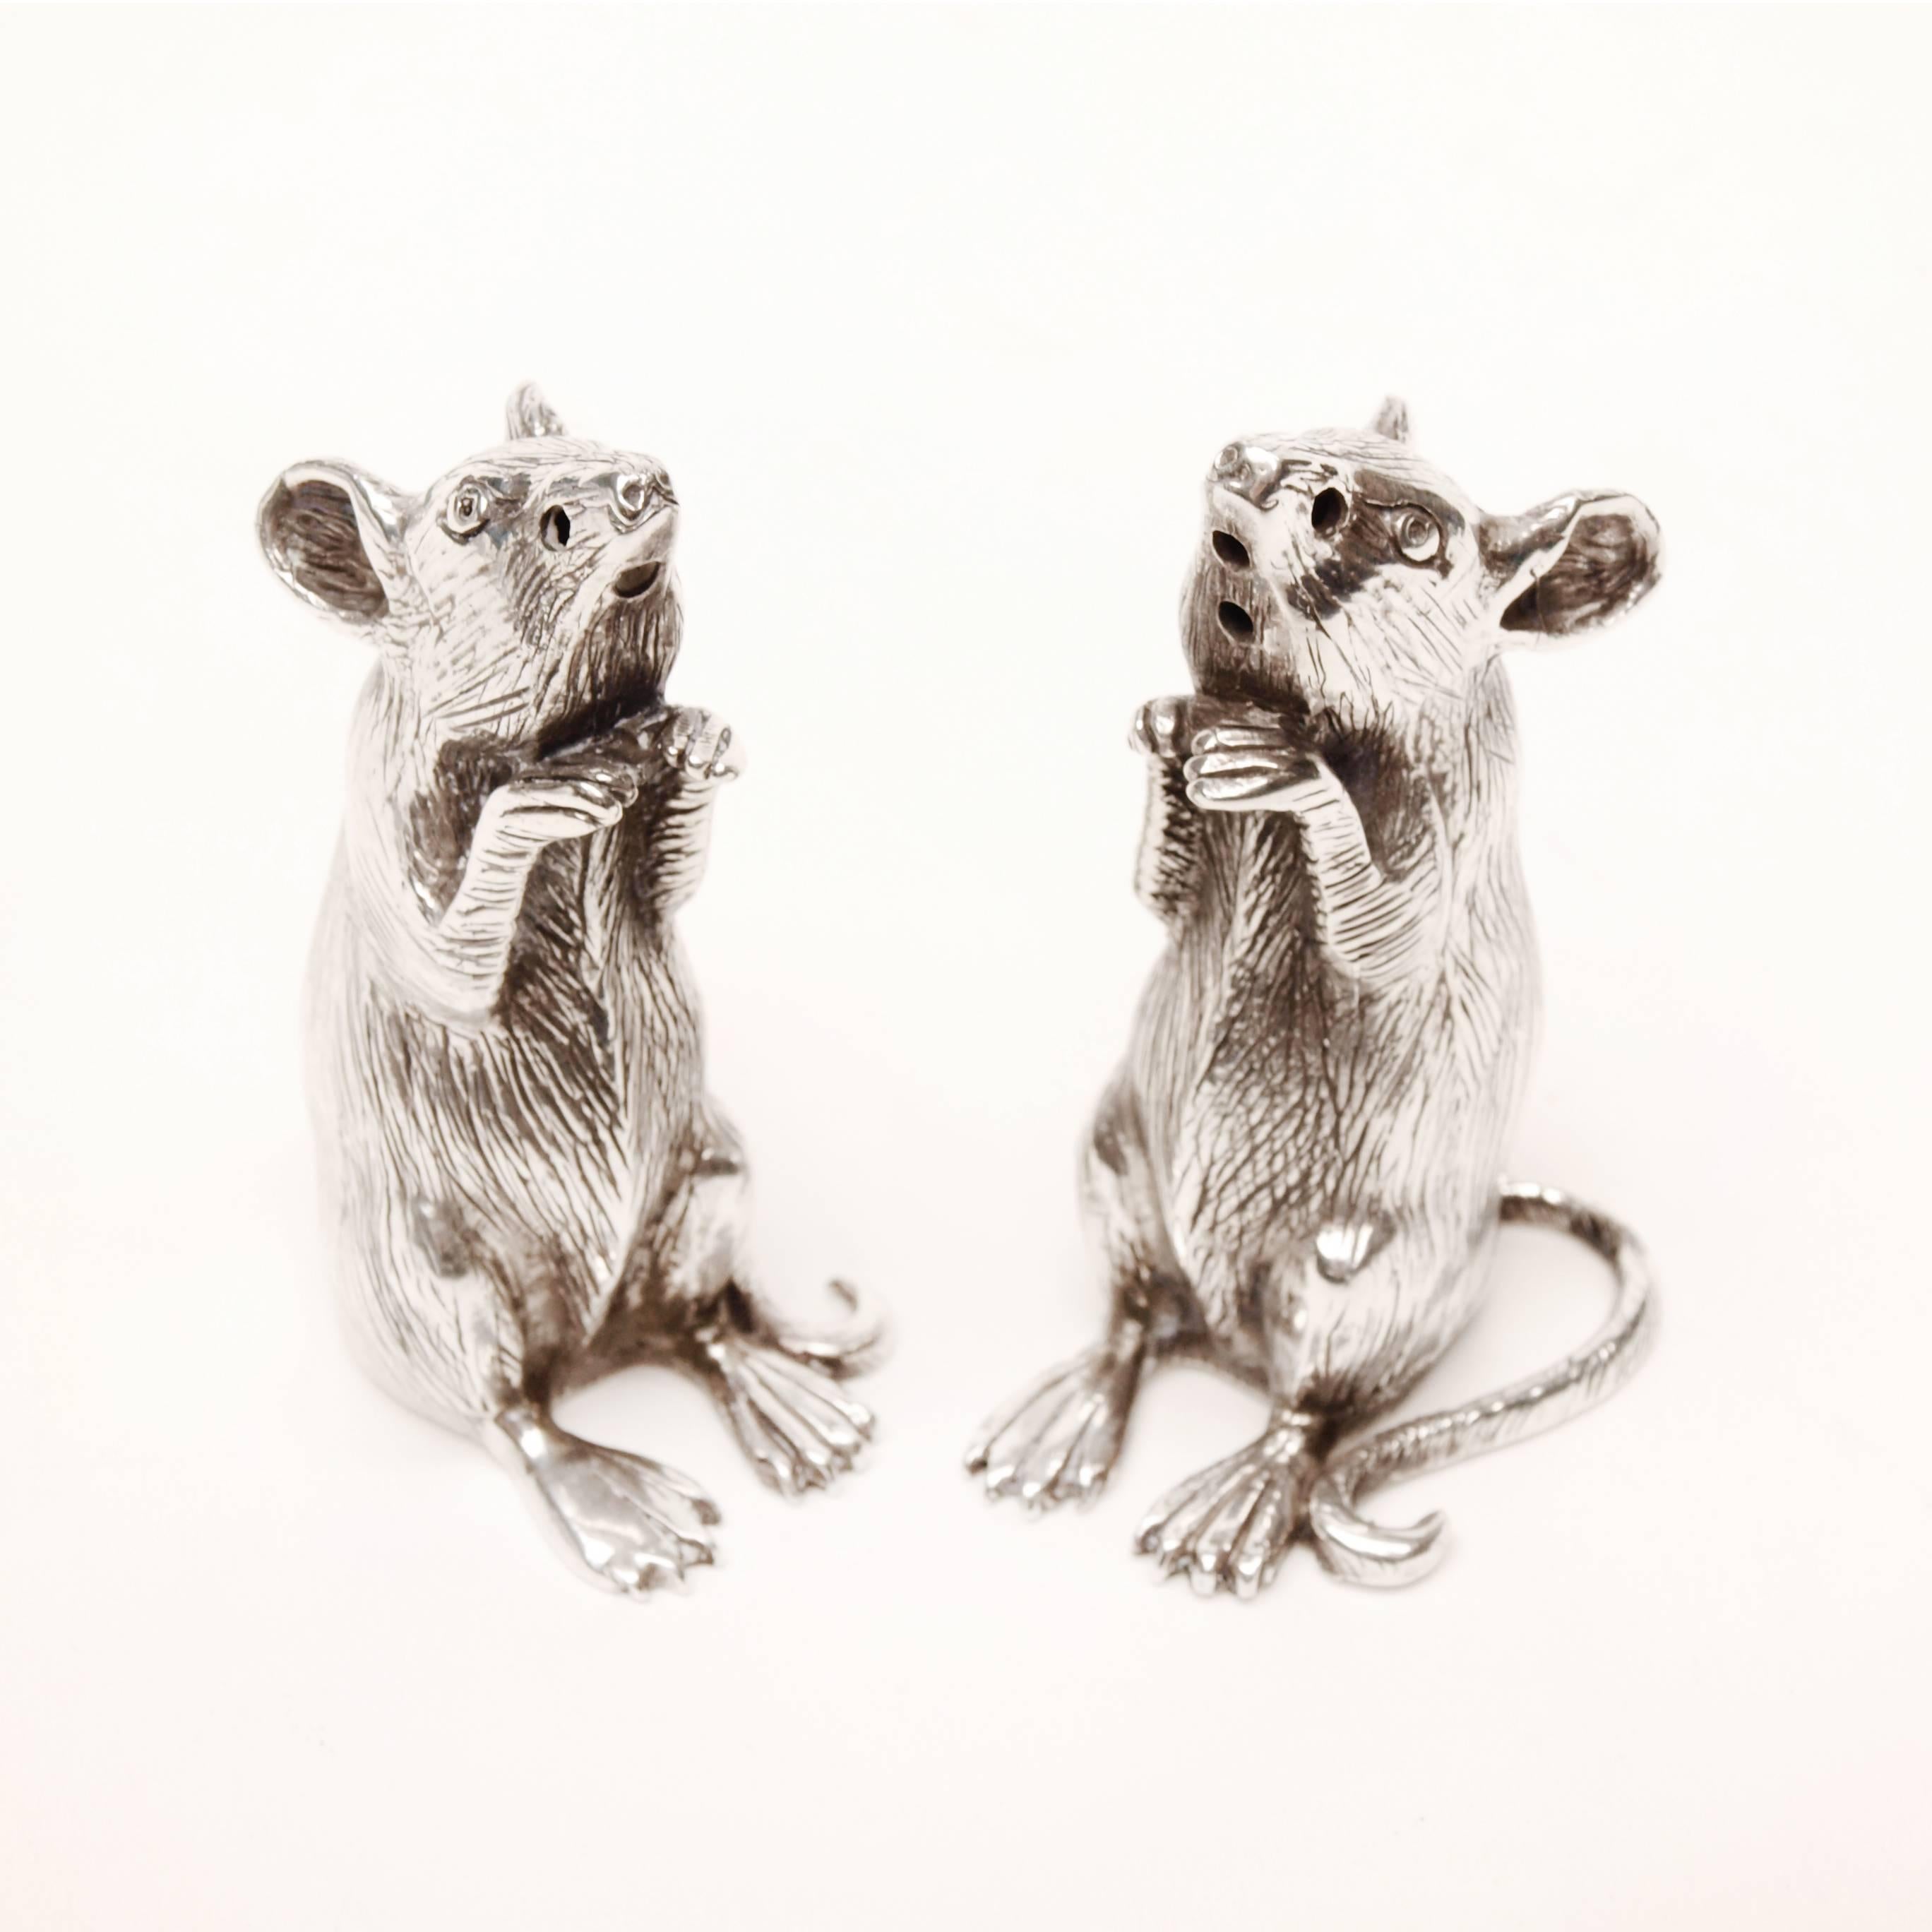 British Pair of Sterling Silver Mice Salt and Pepper Pots, Francis Howard